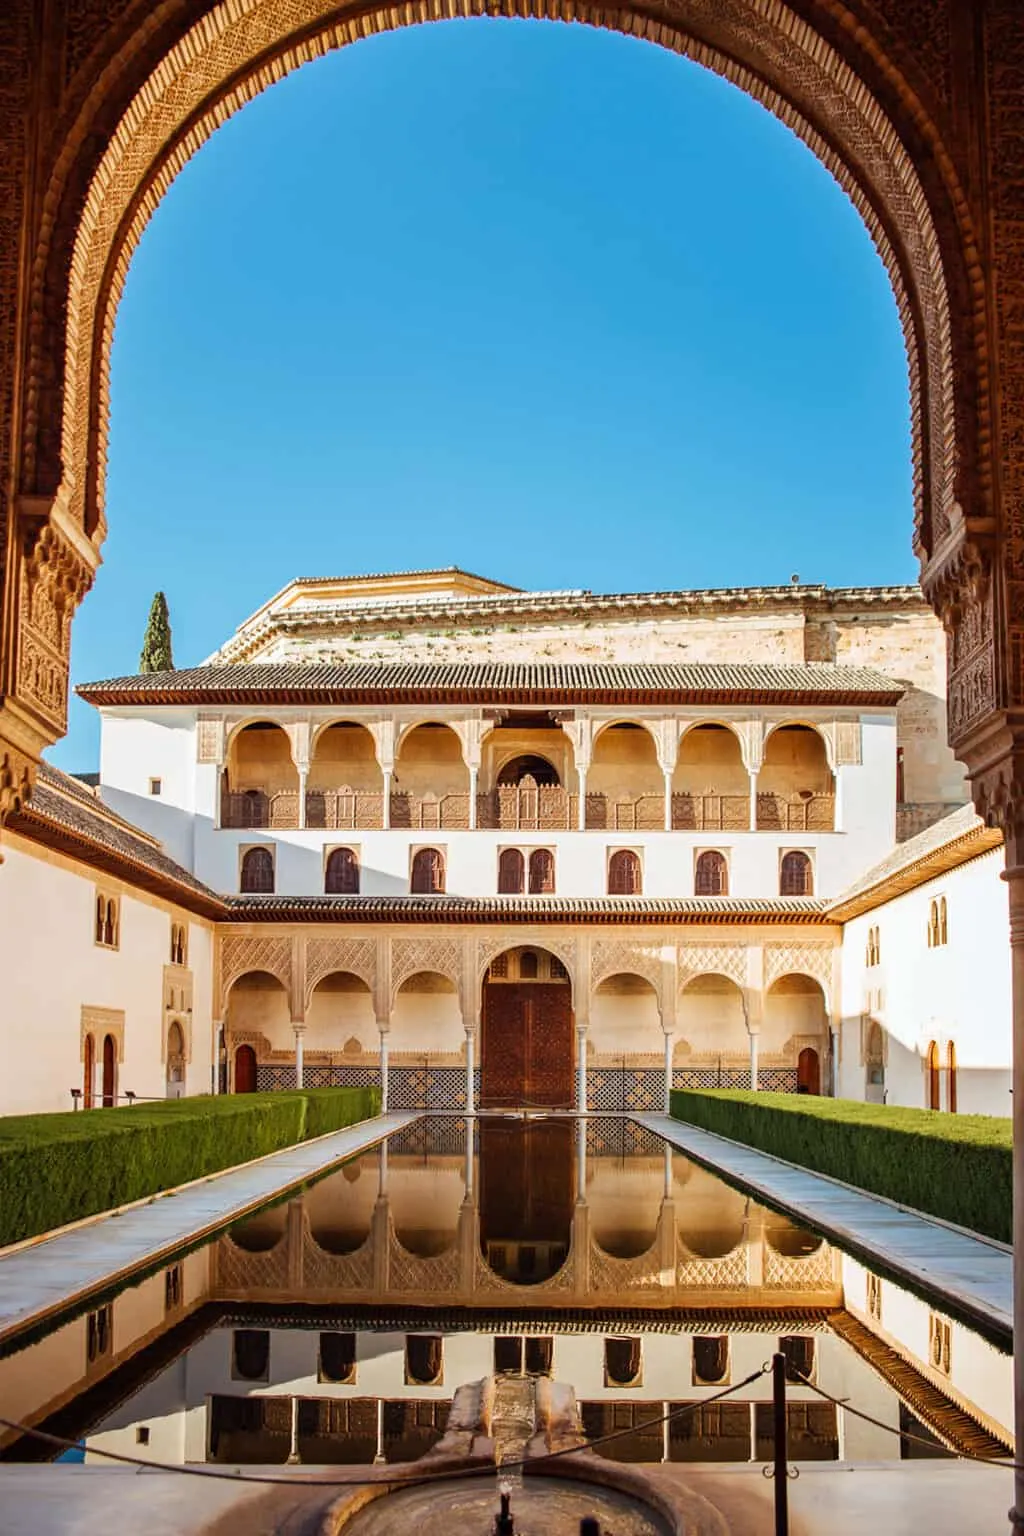 Islamic style architecture reflected in a pond inside the Alhambra in Granda Spain. 